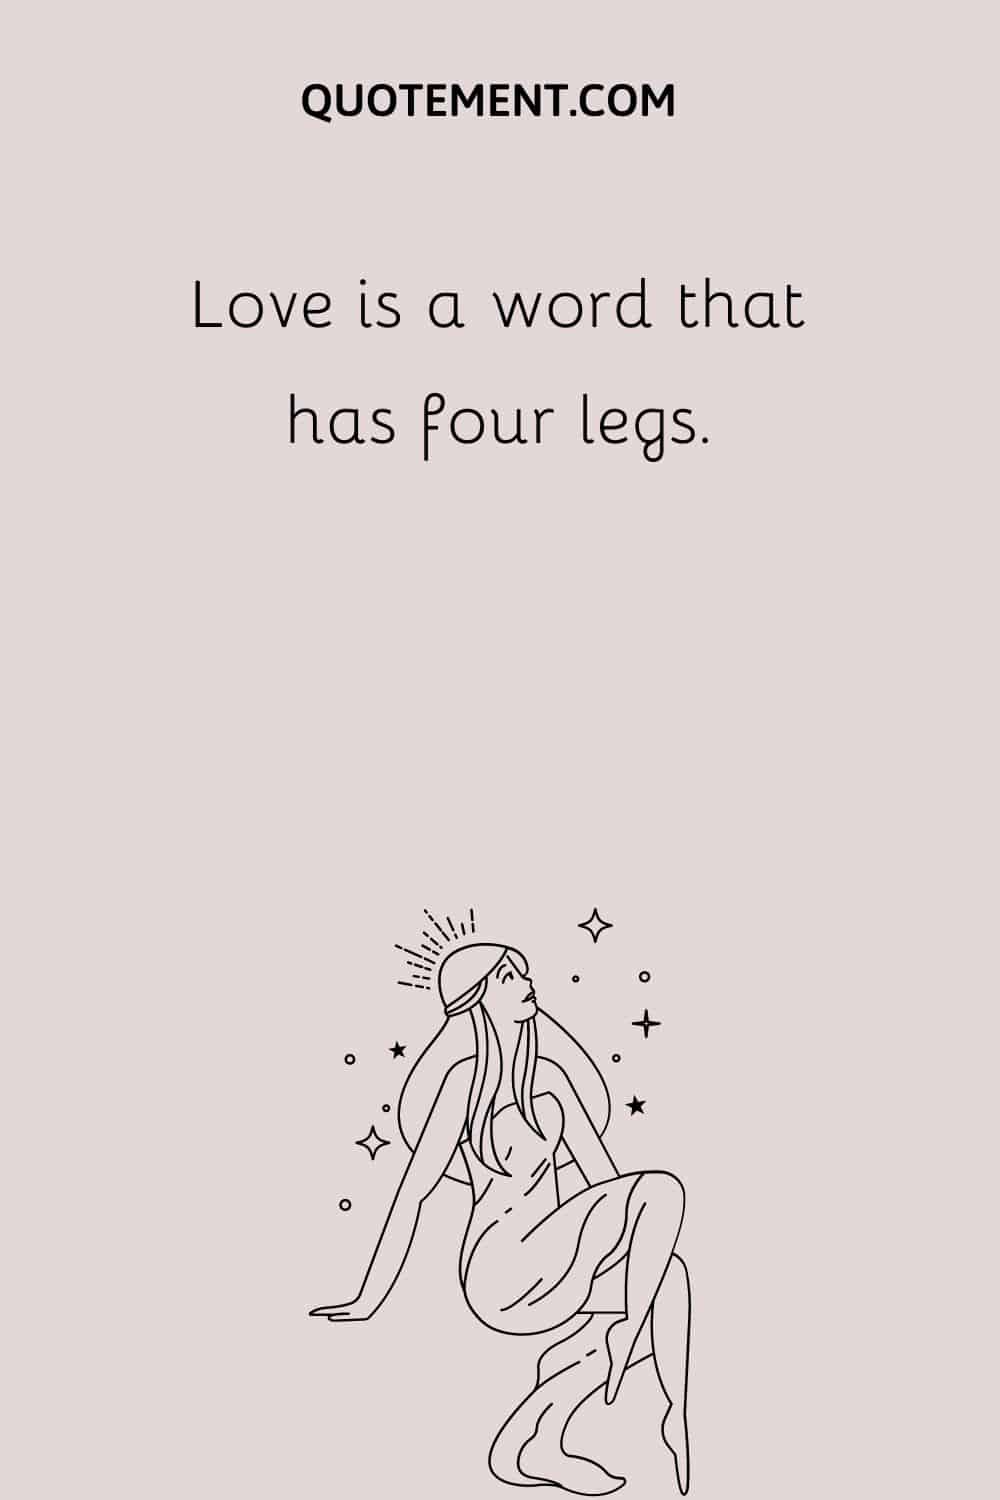 Love is a word that has four legs.